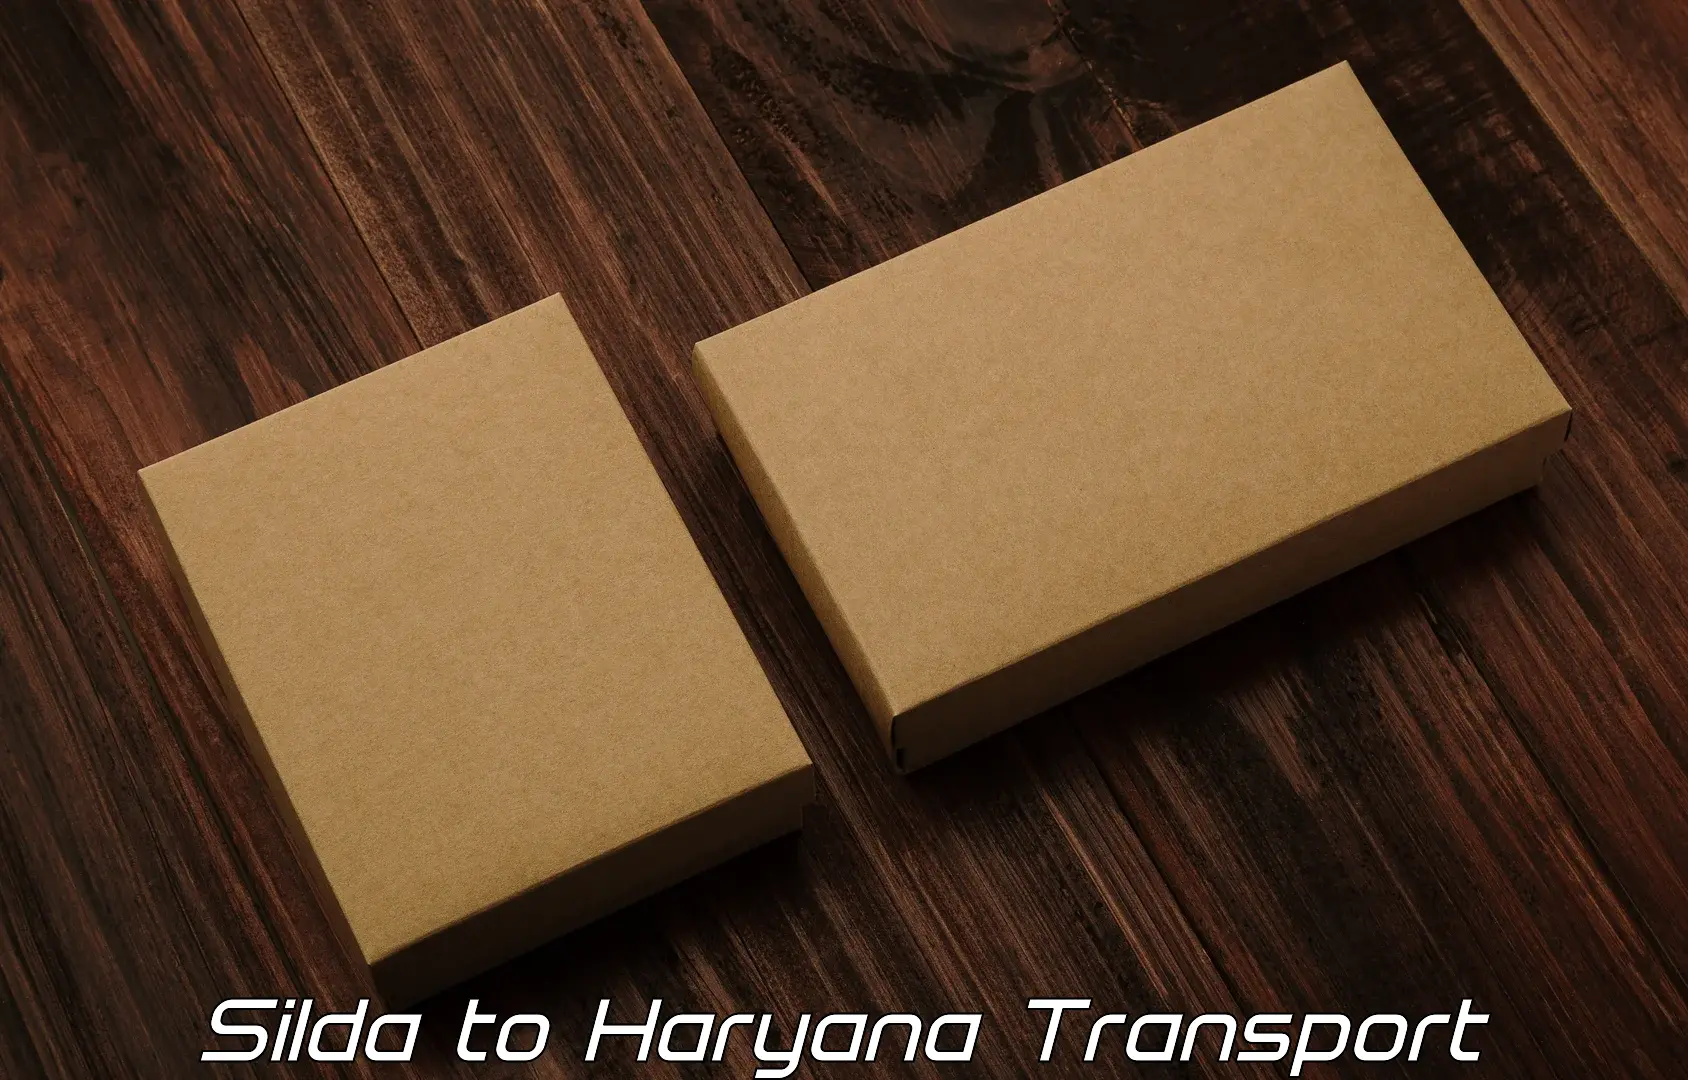 Nationwide transport services Silda to Haryana